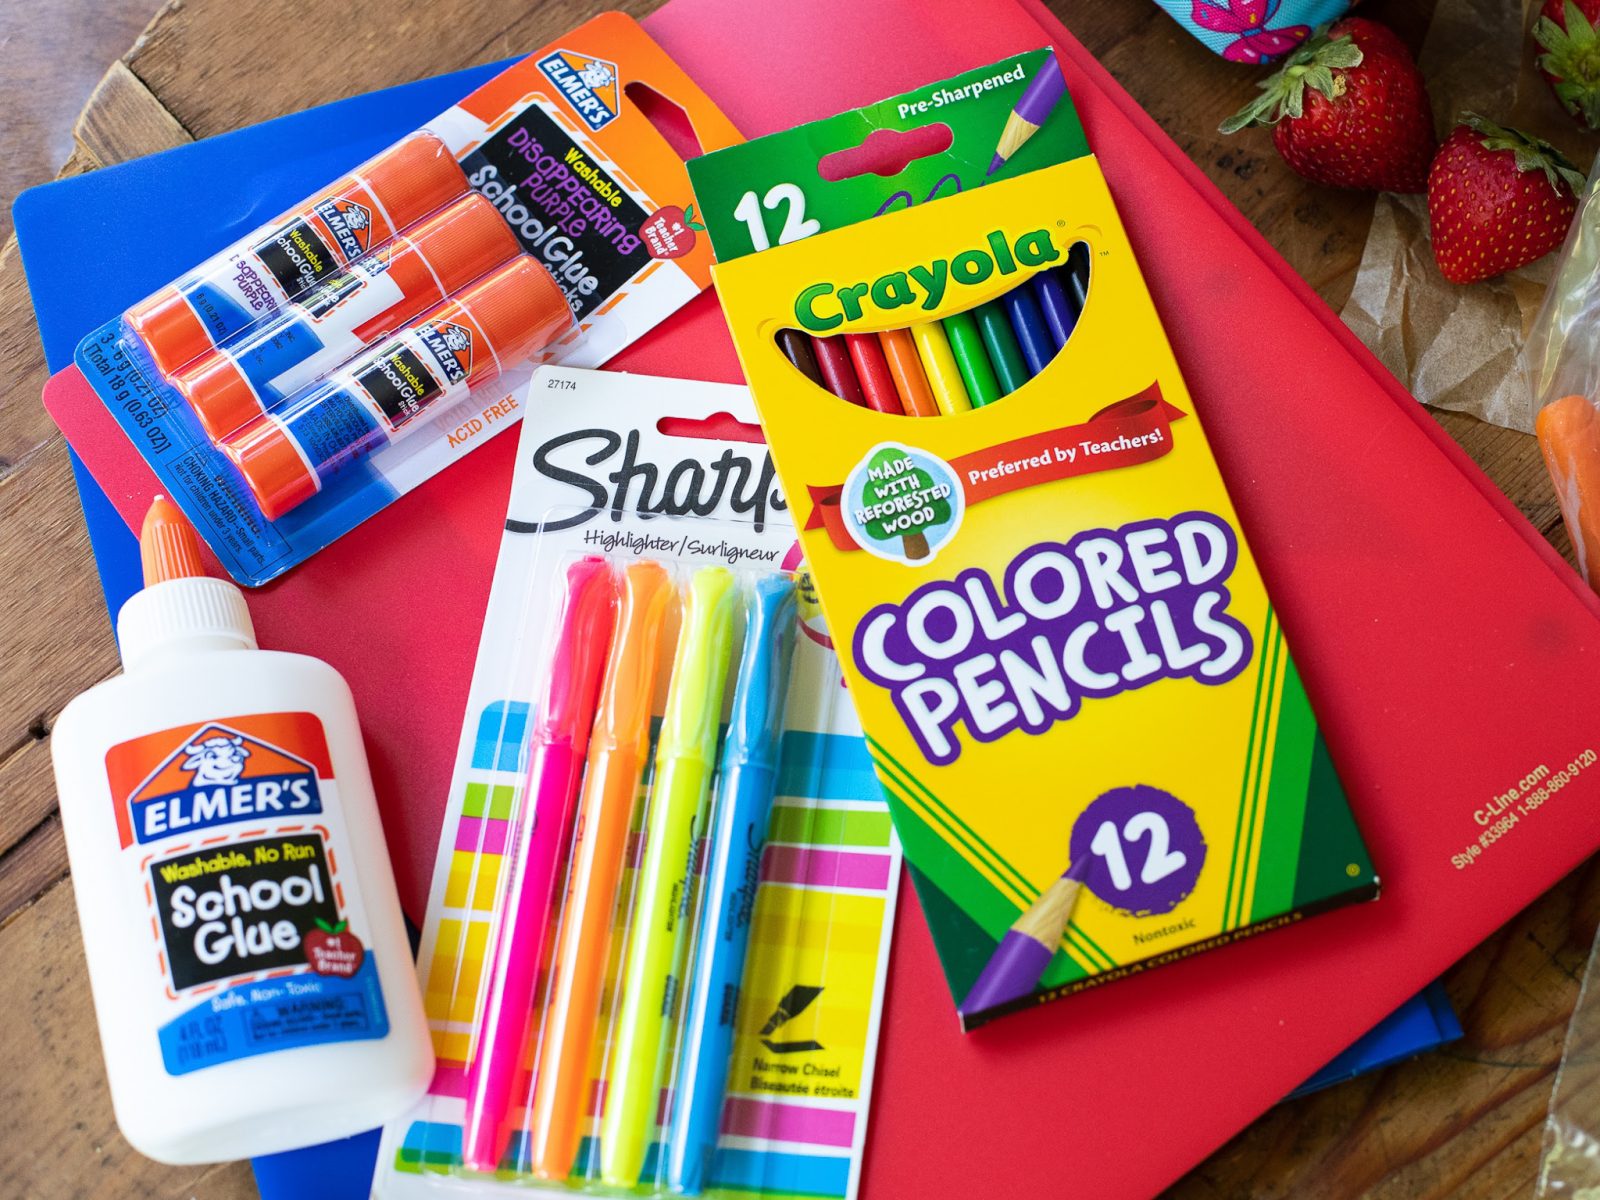 Cheap School Supplies At Kroger – Get Supplies For As Low As 50¢